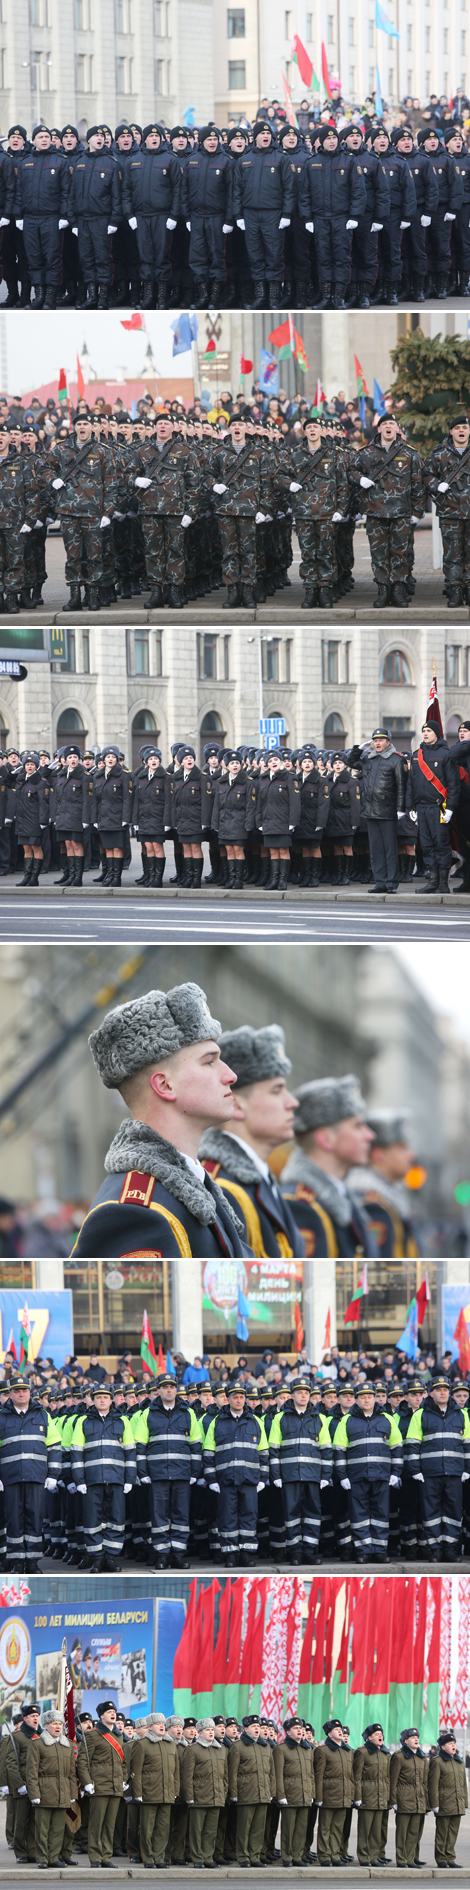 Parade to mark the 100th anniversary of police in Minsk 